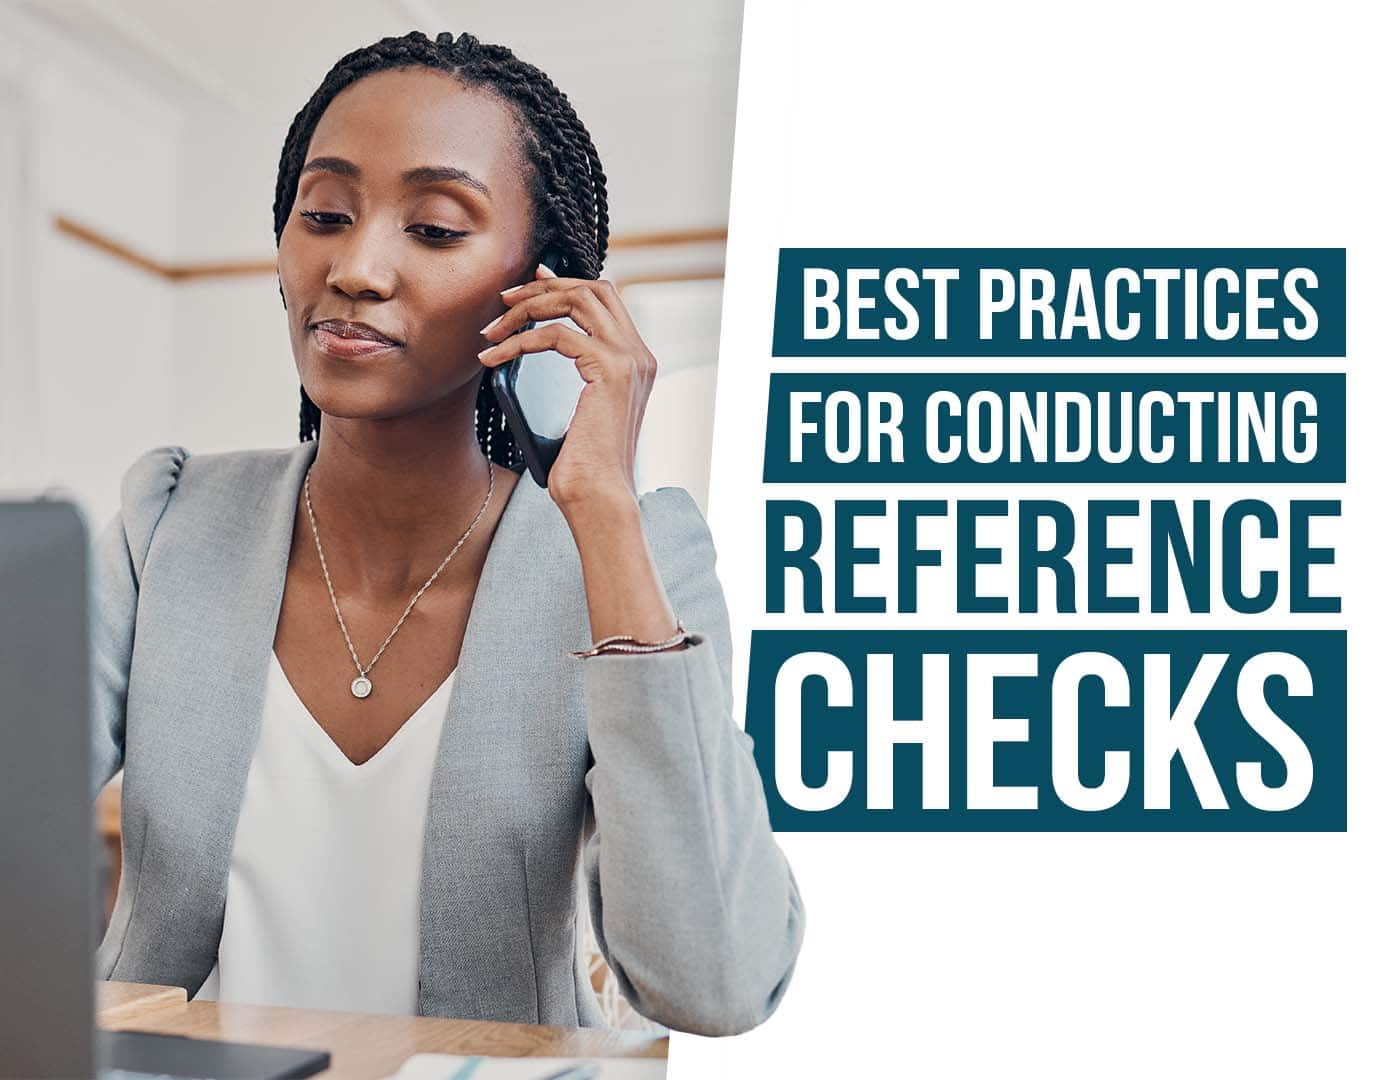 Best Practices for Conducting Reference Checks